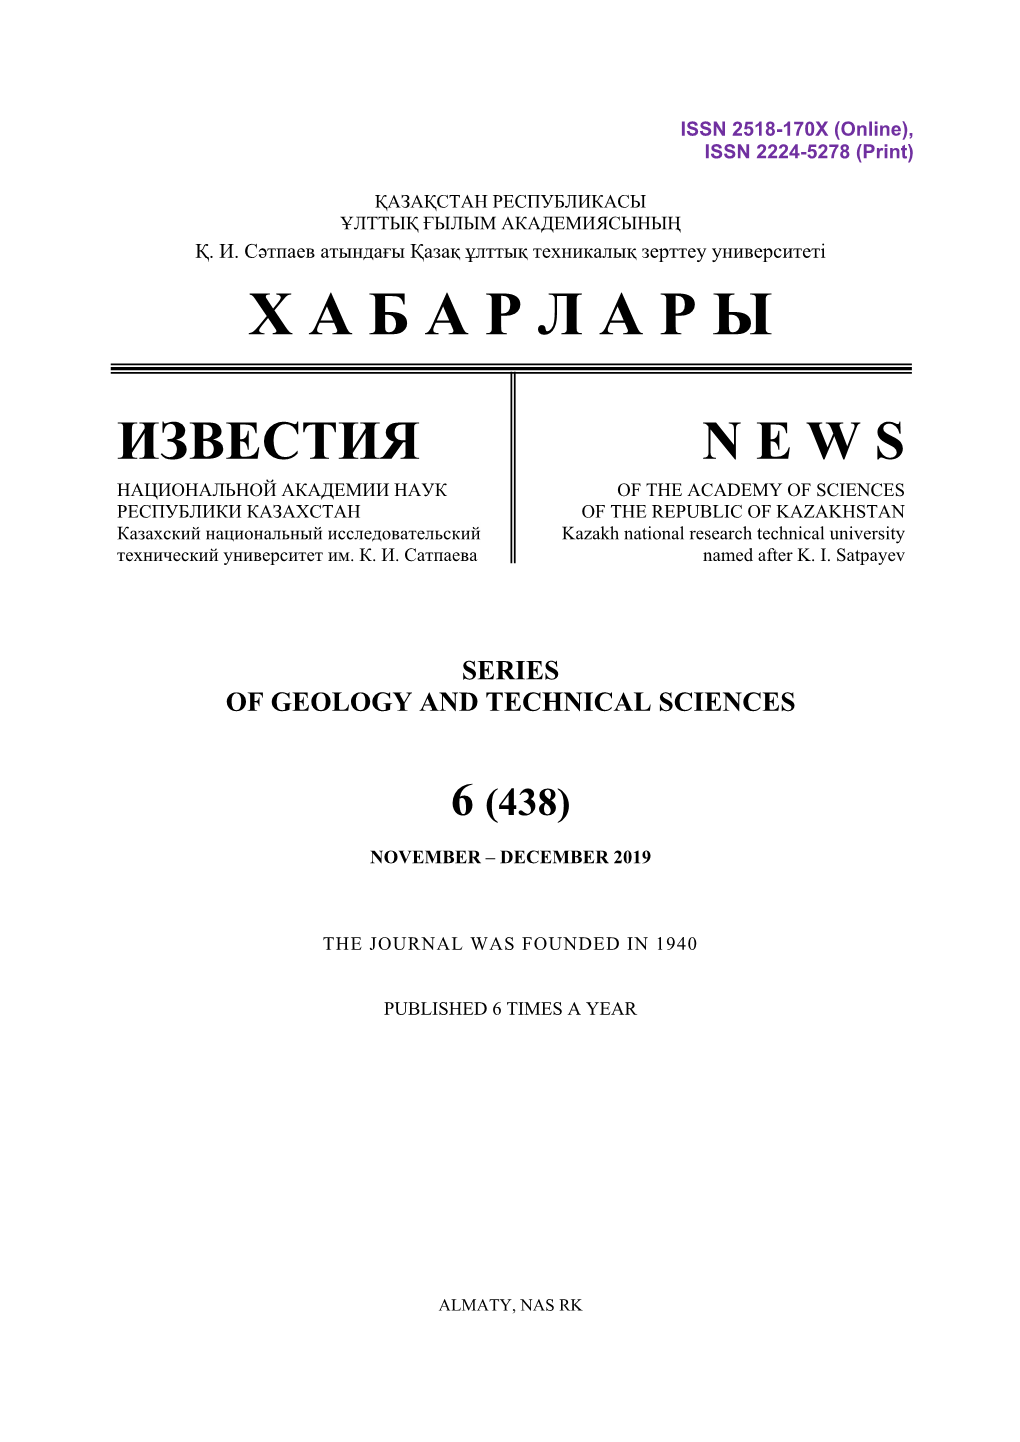 Series of Geology and Technical Sciences 6